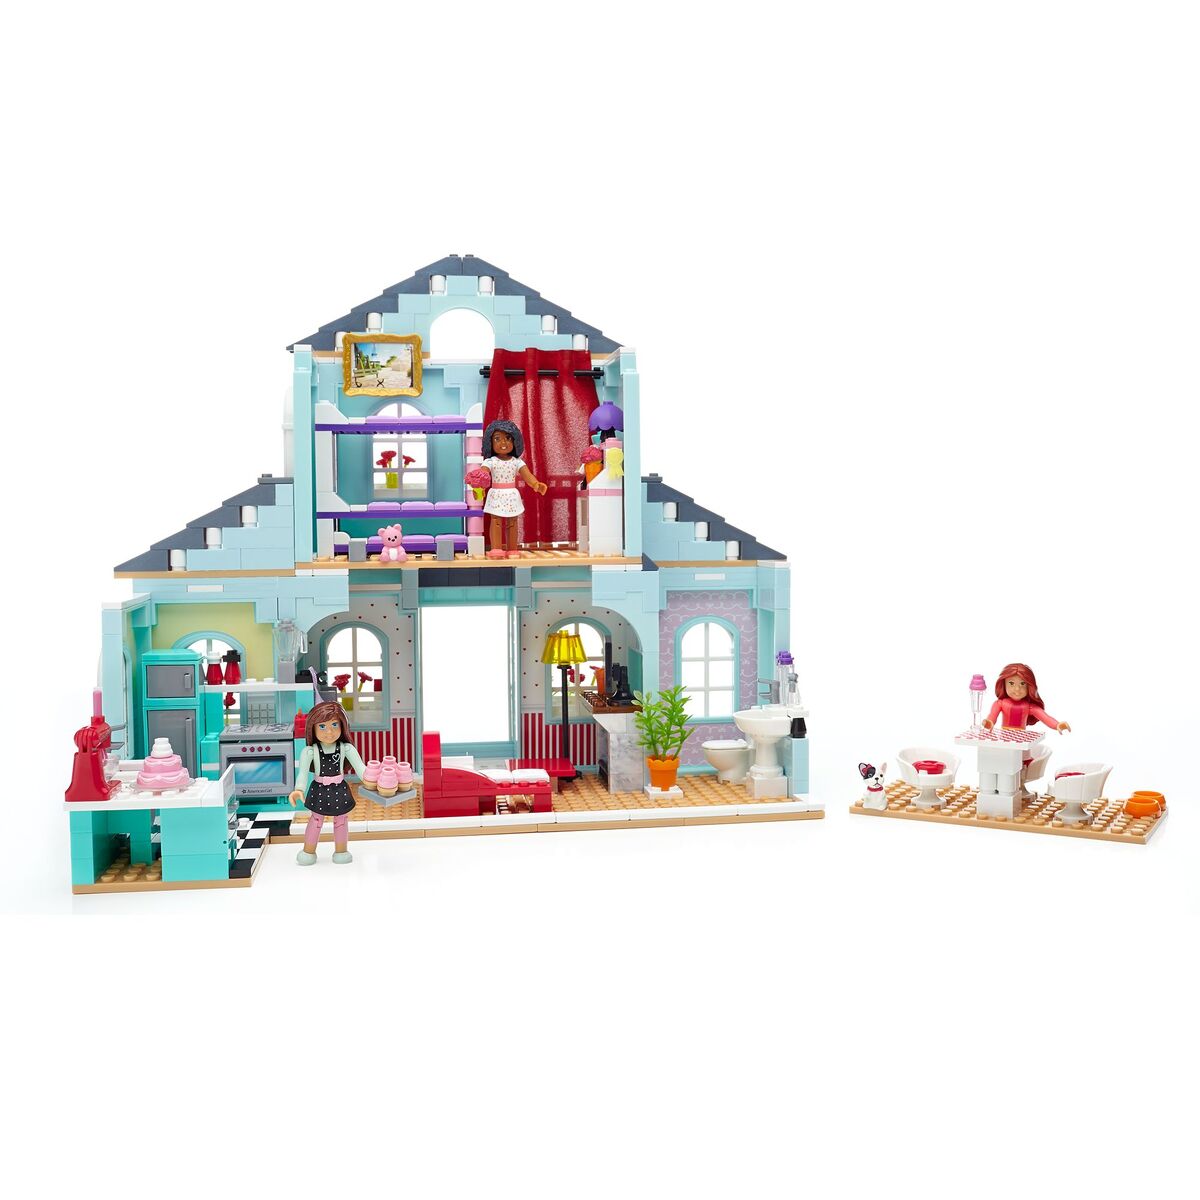 MegaBloks Grace's Two-in-One Buildable Home | American Girl Wiki